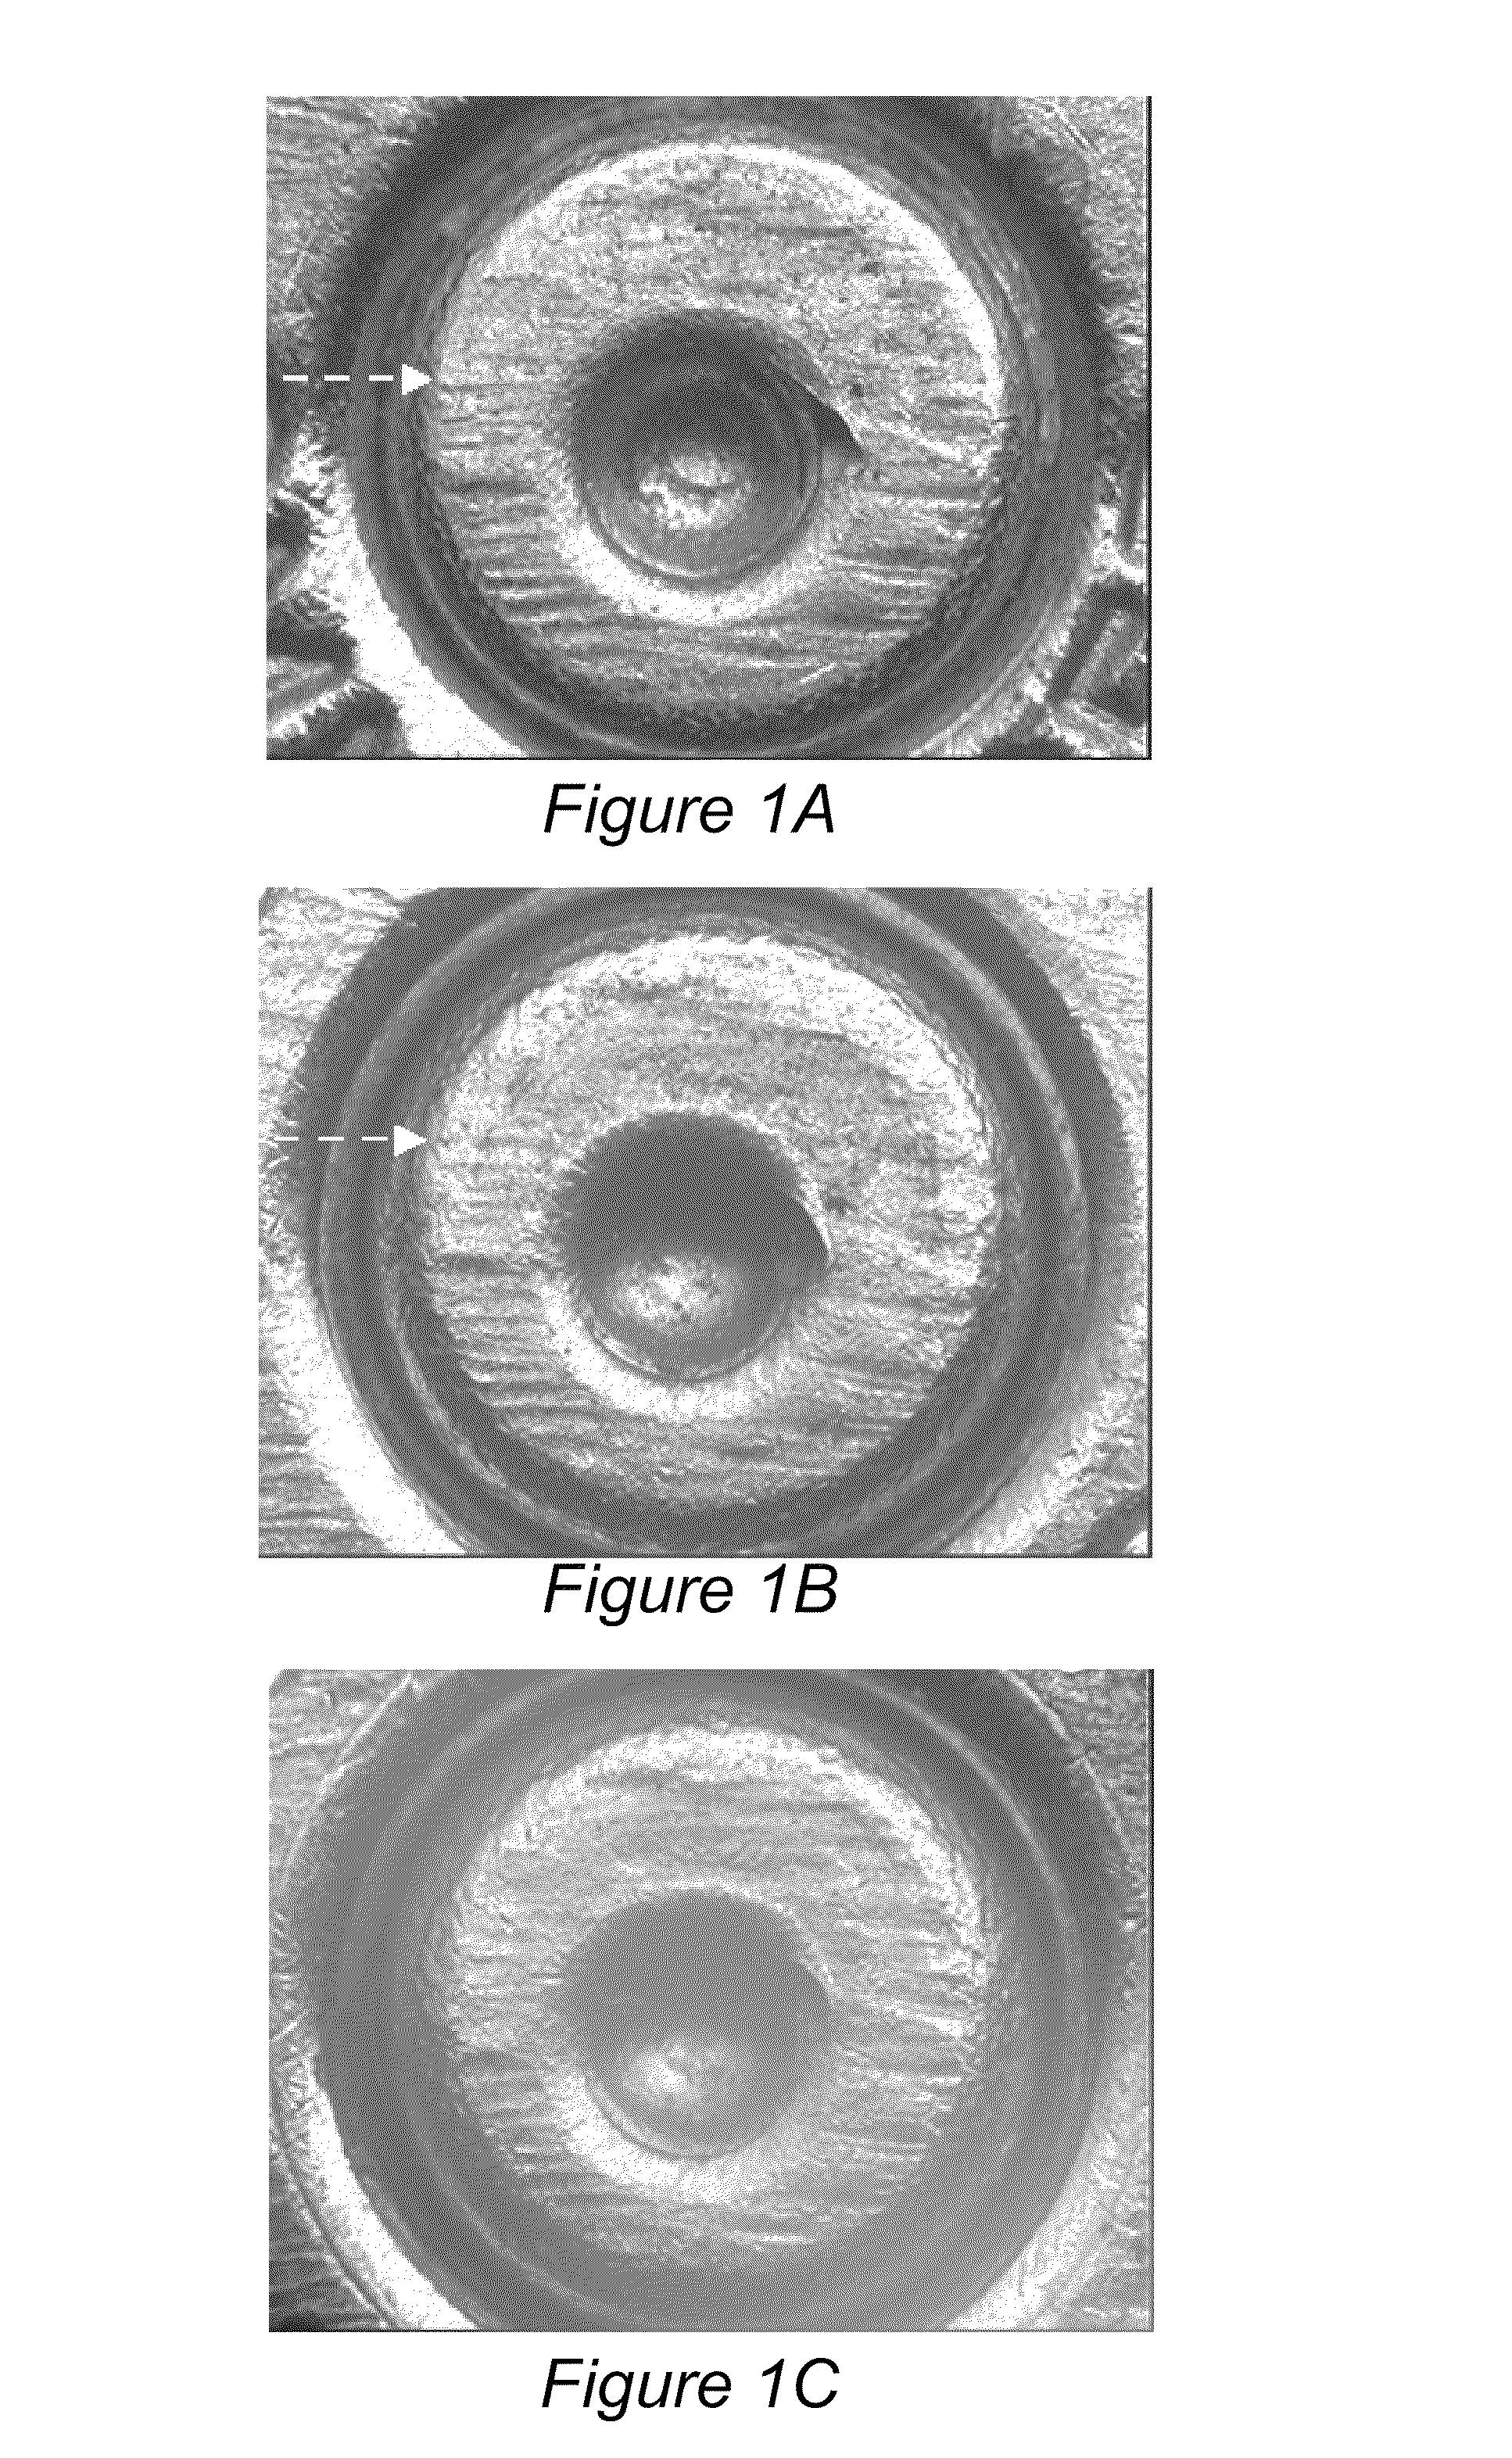 Method and apparatus for alignment, comparison and identification of characteristic tool marks, including ballistic signatures